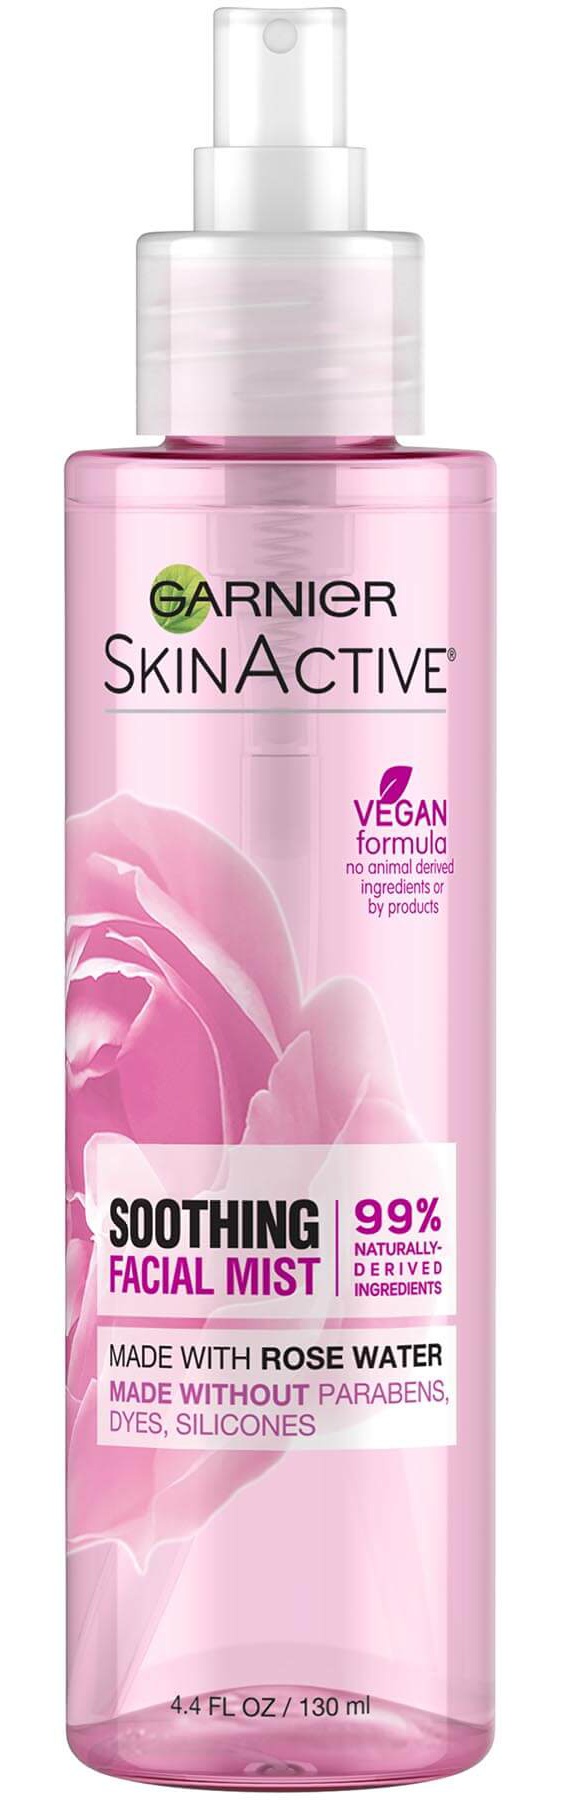 Garnier Skinactive Soothing Facial Mist With Rose Water